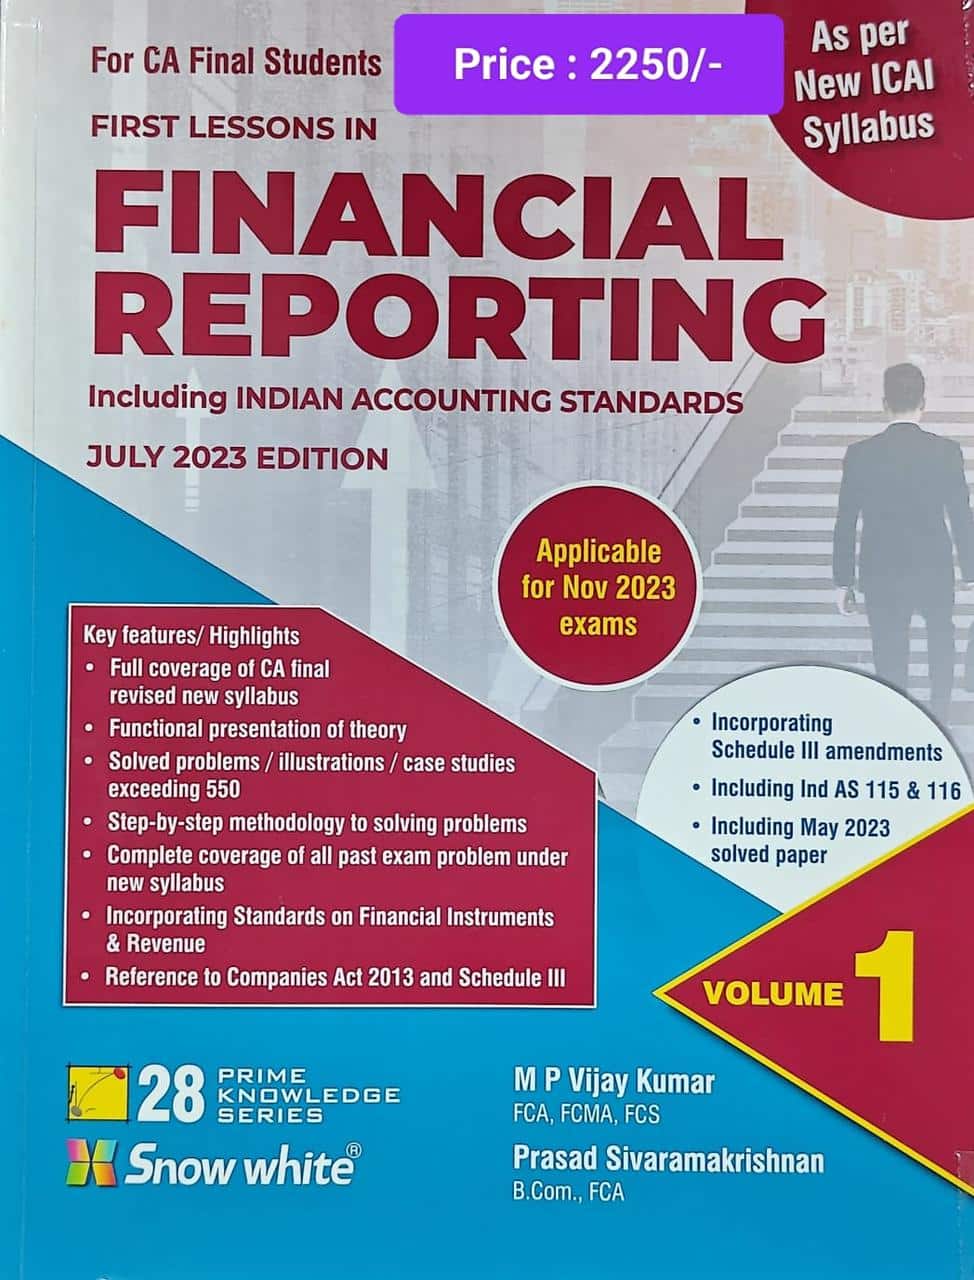 Snow White's First Lessons in Financial Reporting by M.P. Vijay Kumar for Nov 2023